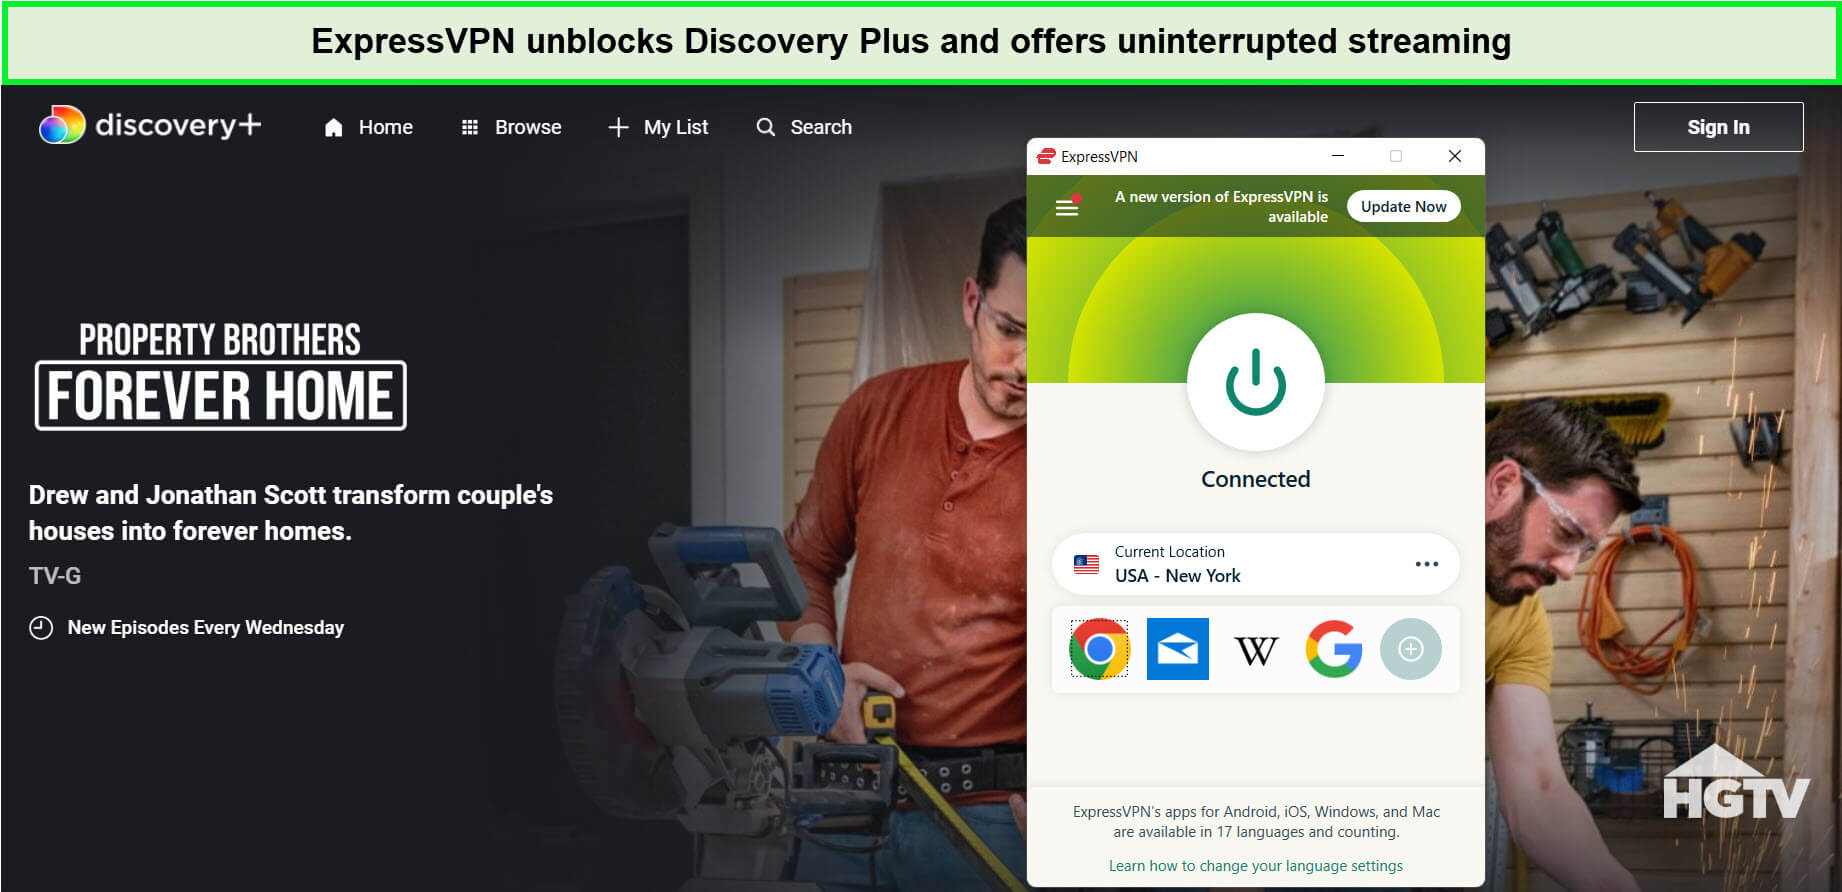 expressvpn-unblocks-property-brothers-forever-home-season-8-on-discovery-plus-in-Japan